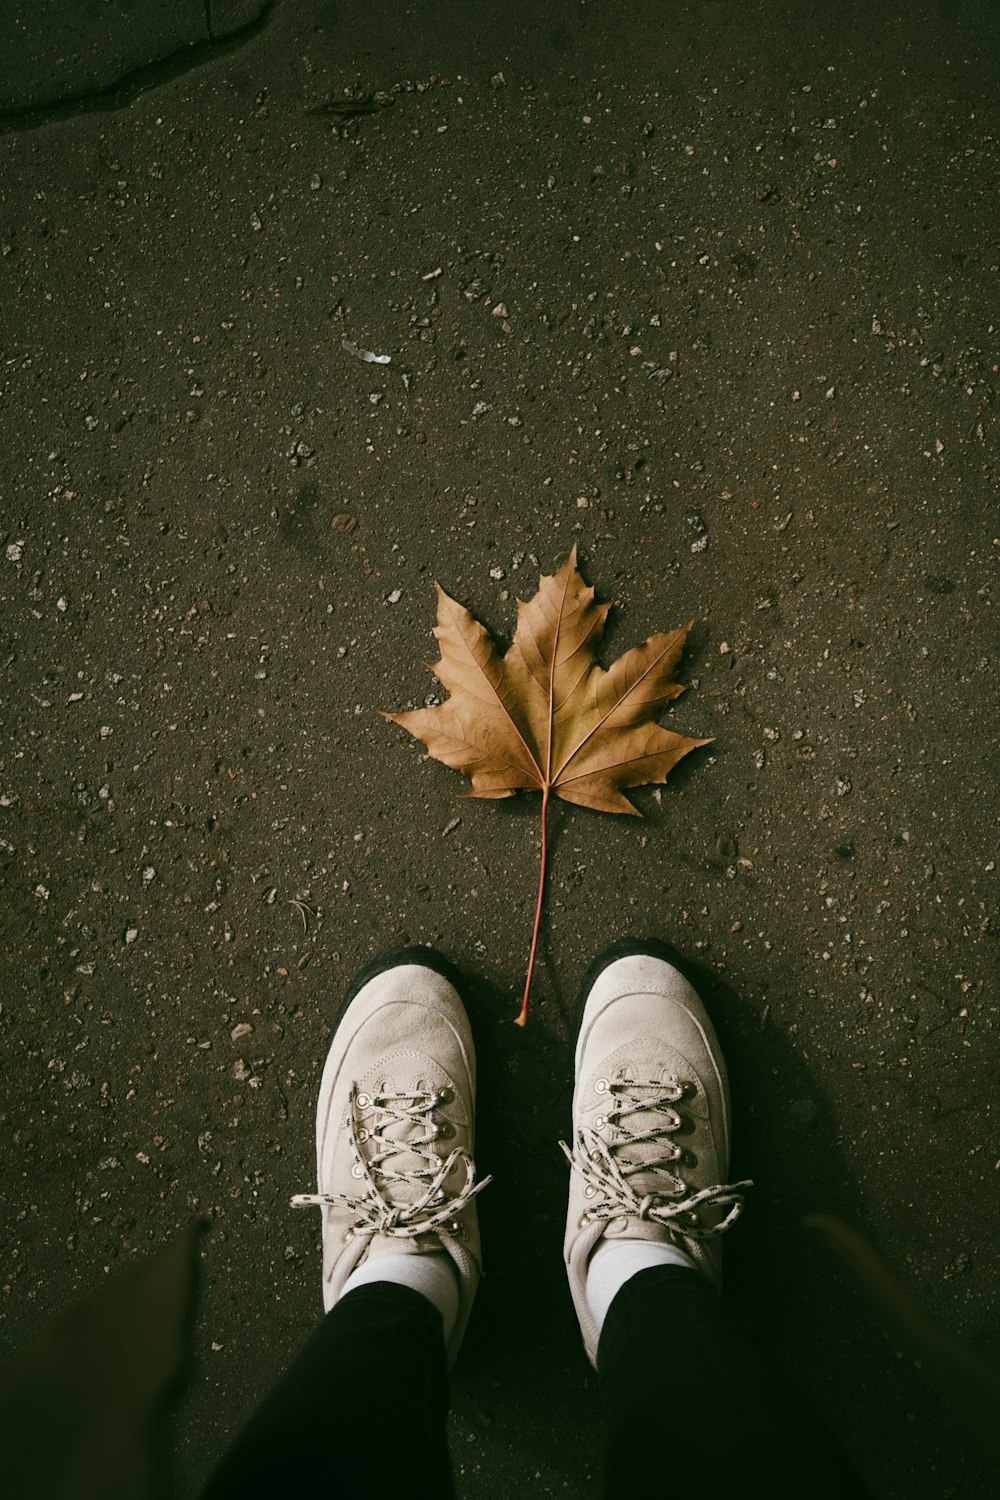 a person standing next to a leaf on the ground